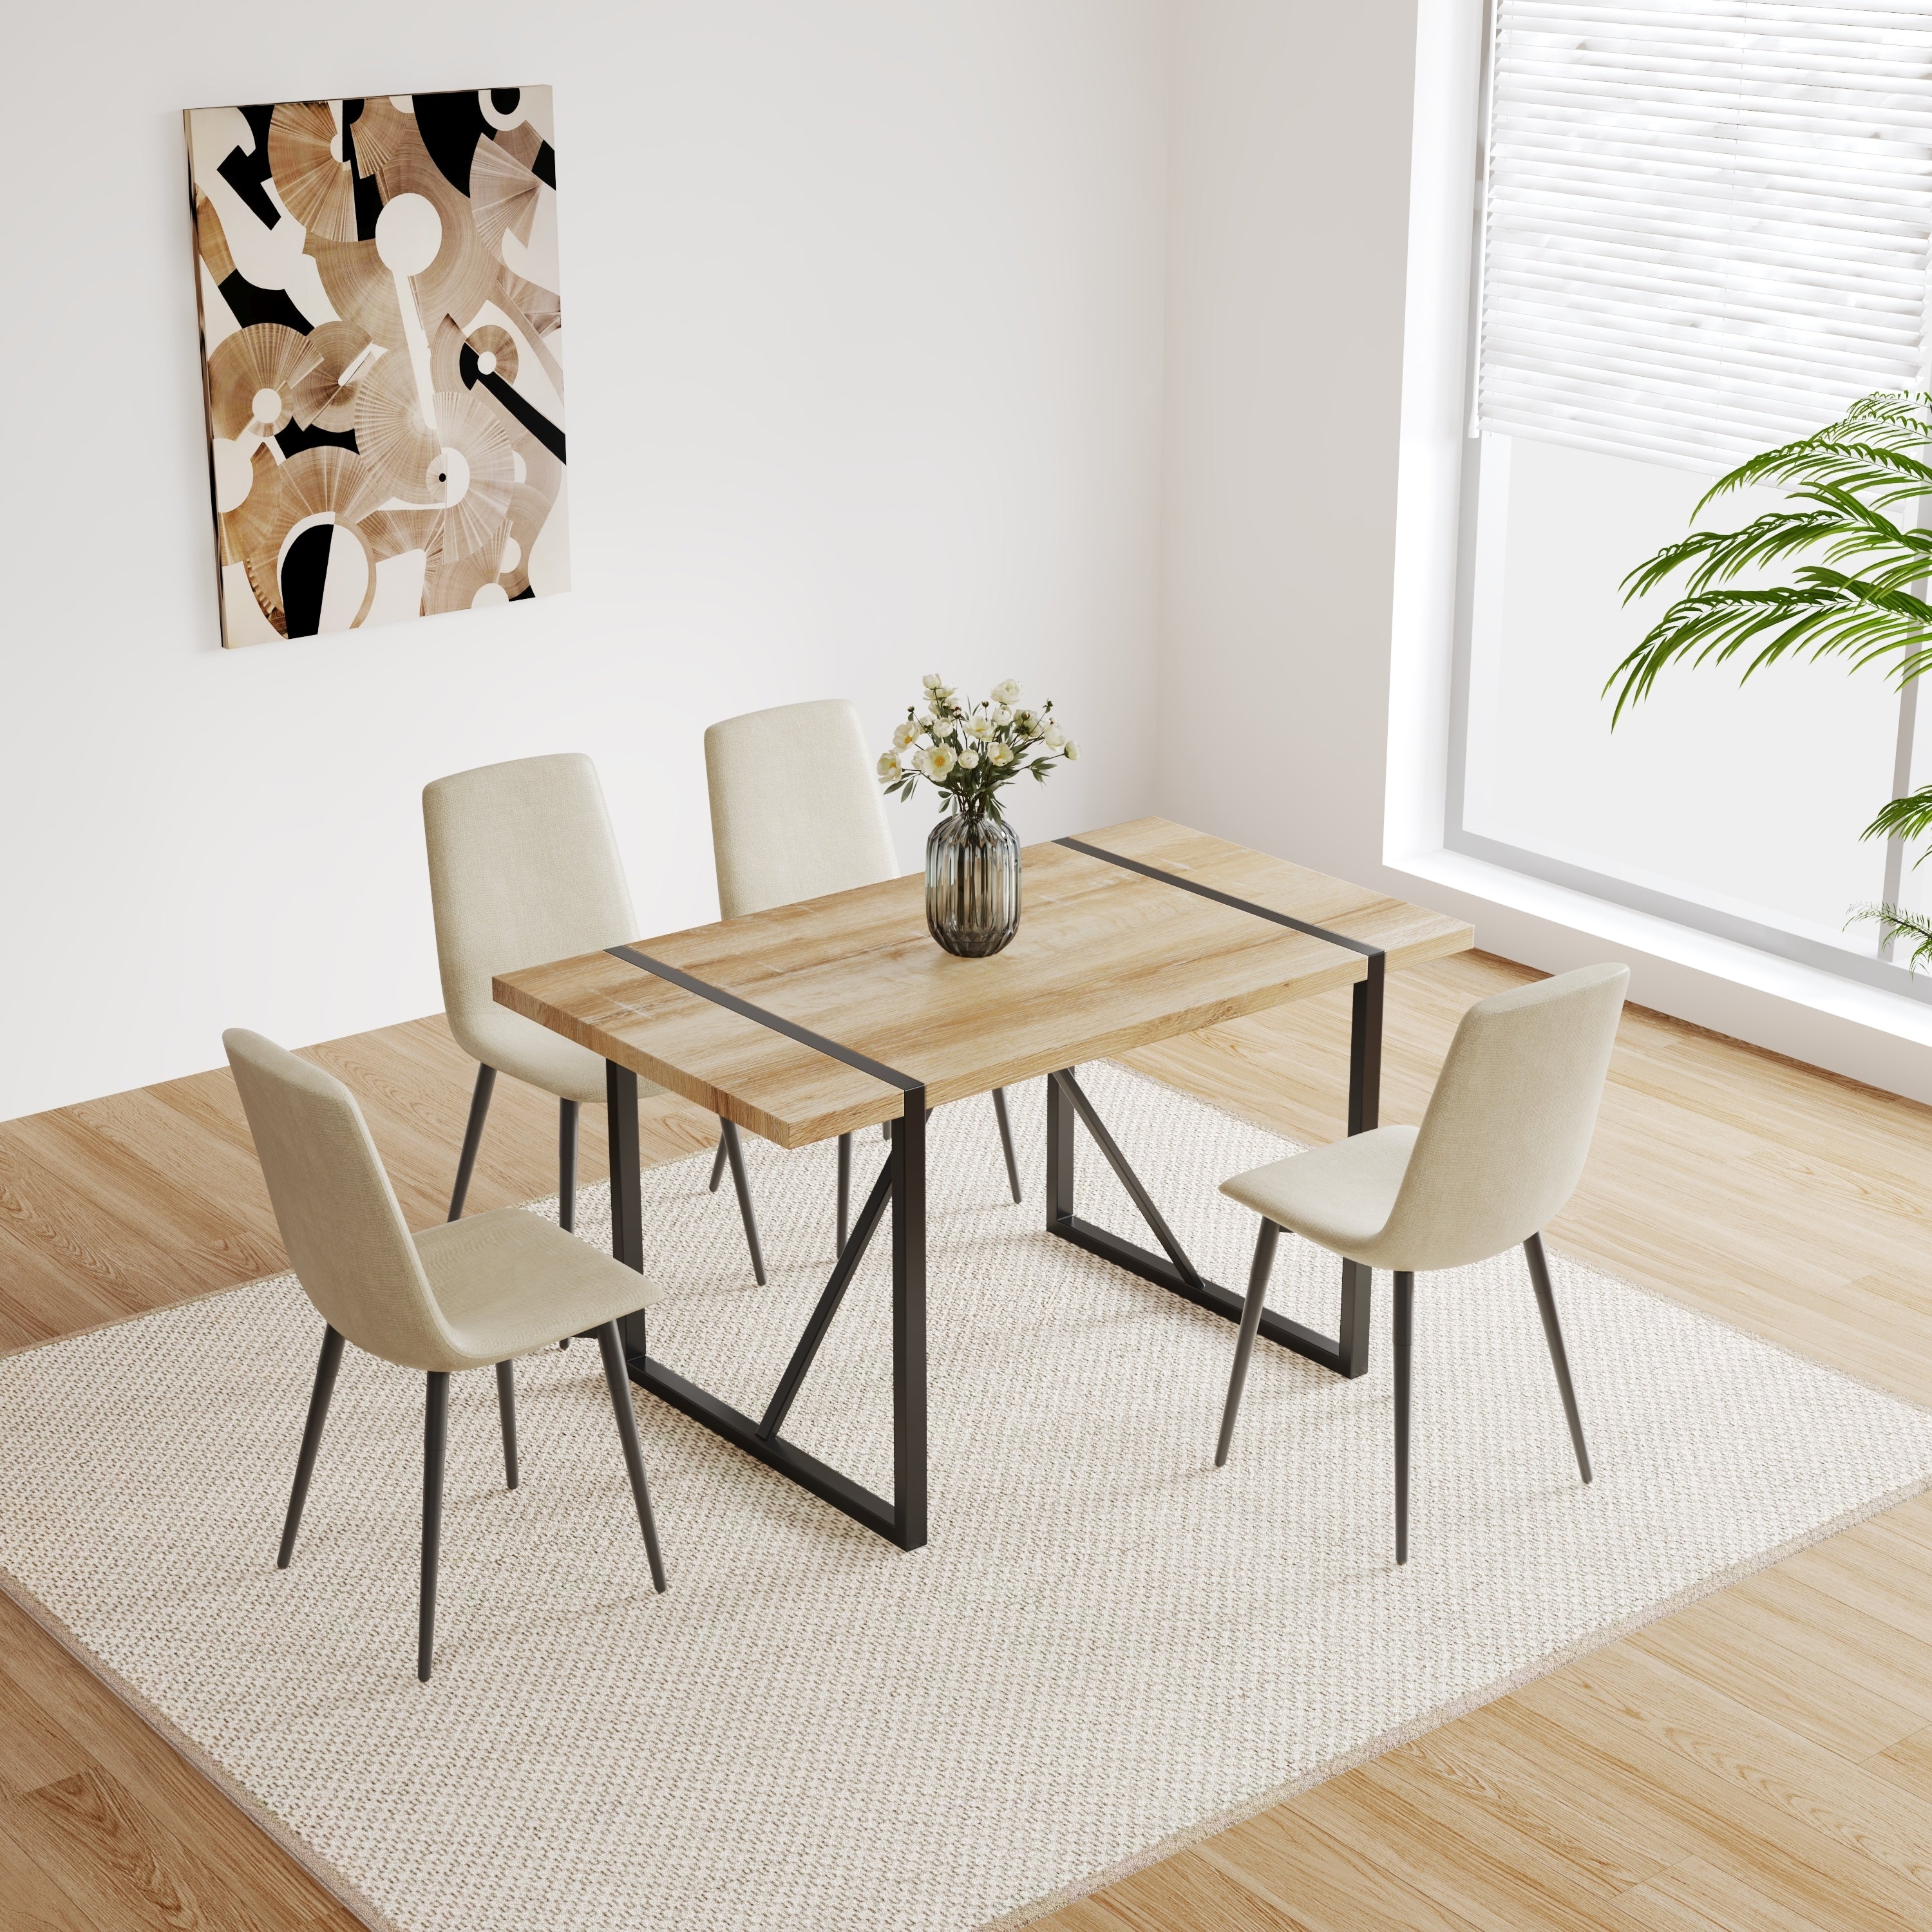 Set of 4 Modern Kitchen Dining Room Chairs, Cushion Seat and Sturdy Black Metal Legs - Beige